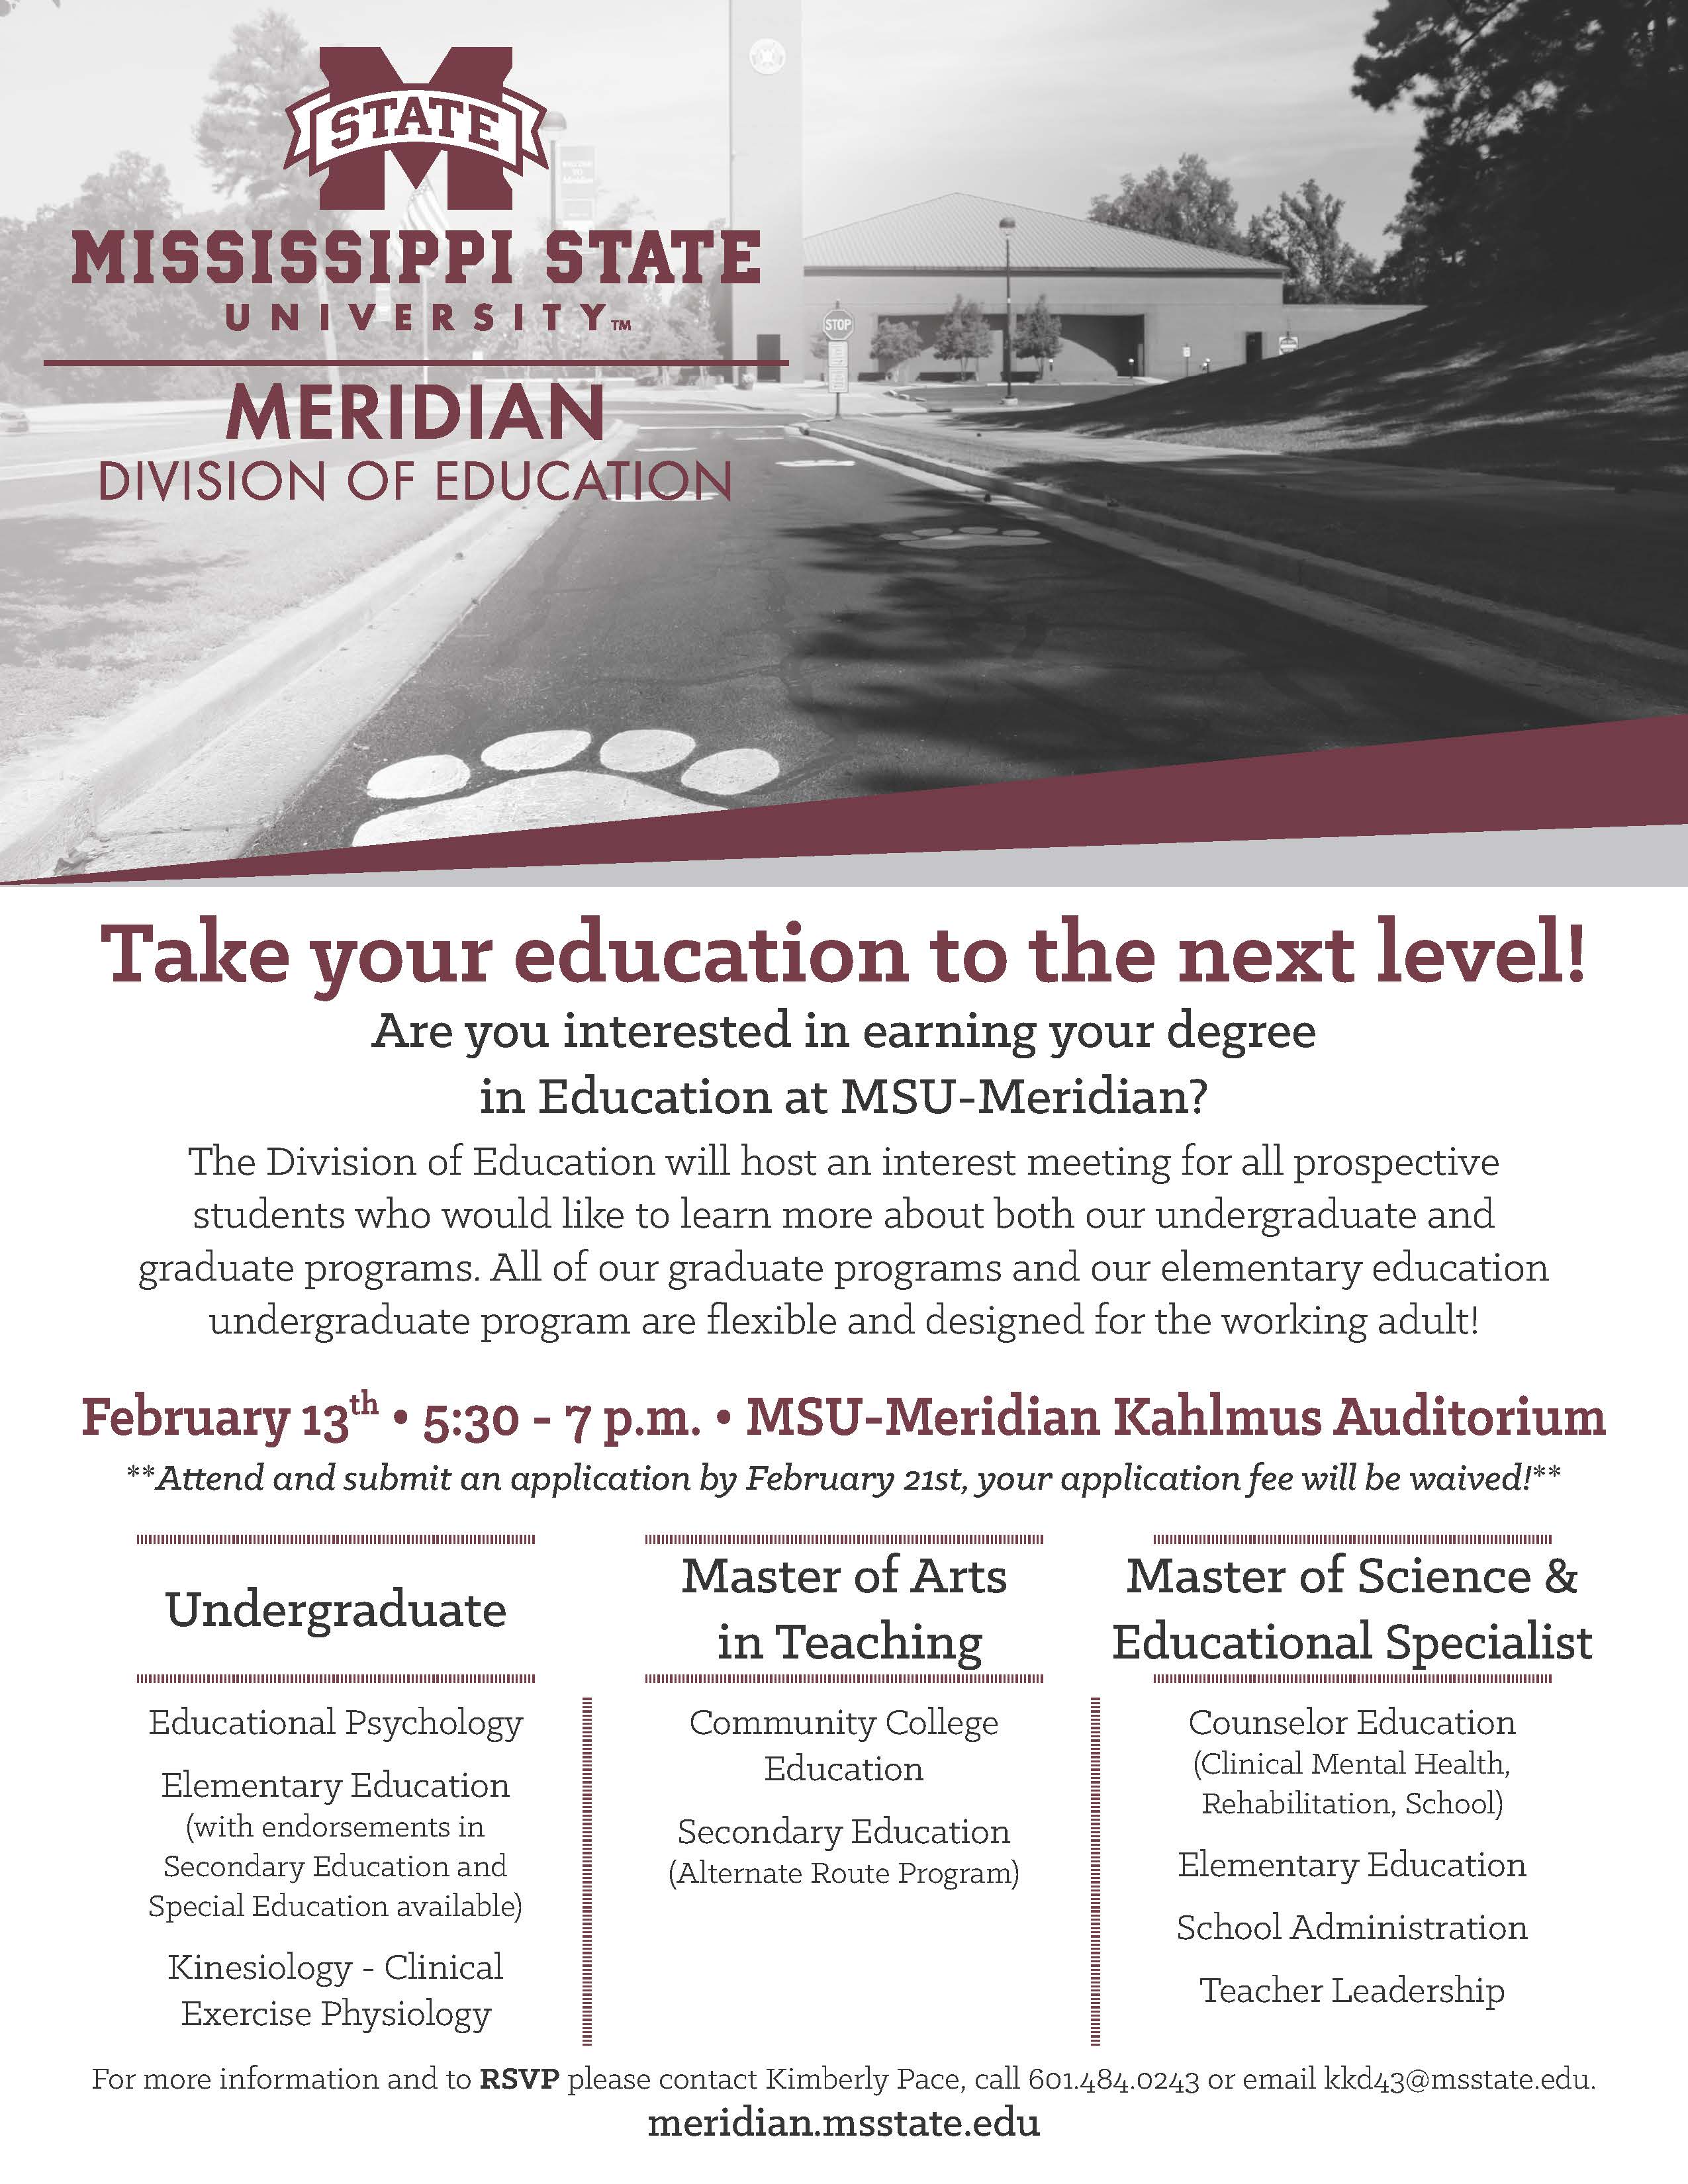 A flyer stating an education information meeting will be held Thursday, February 13 from 5:30 - 7 